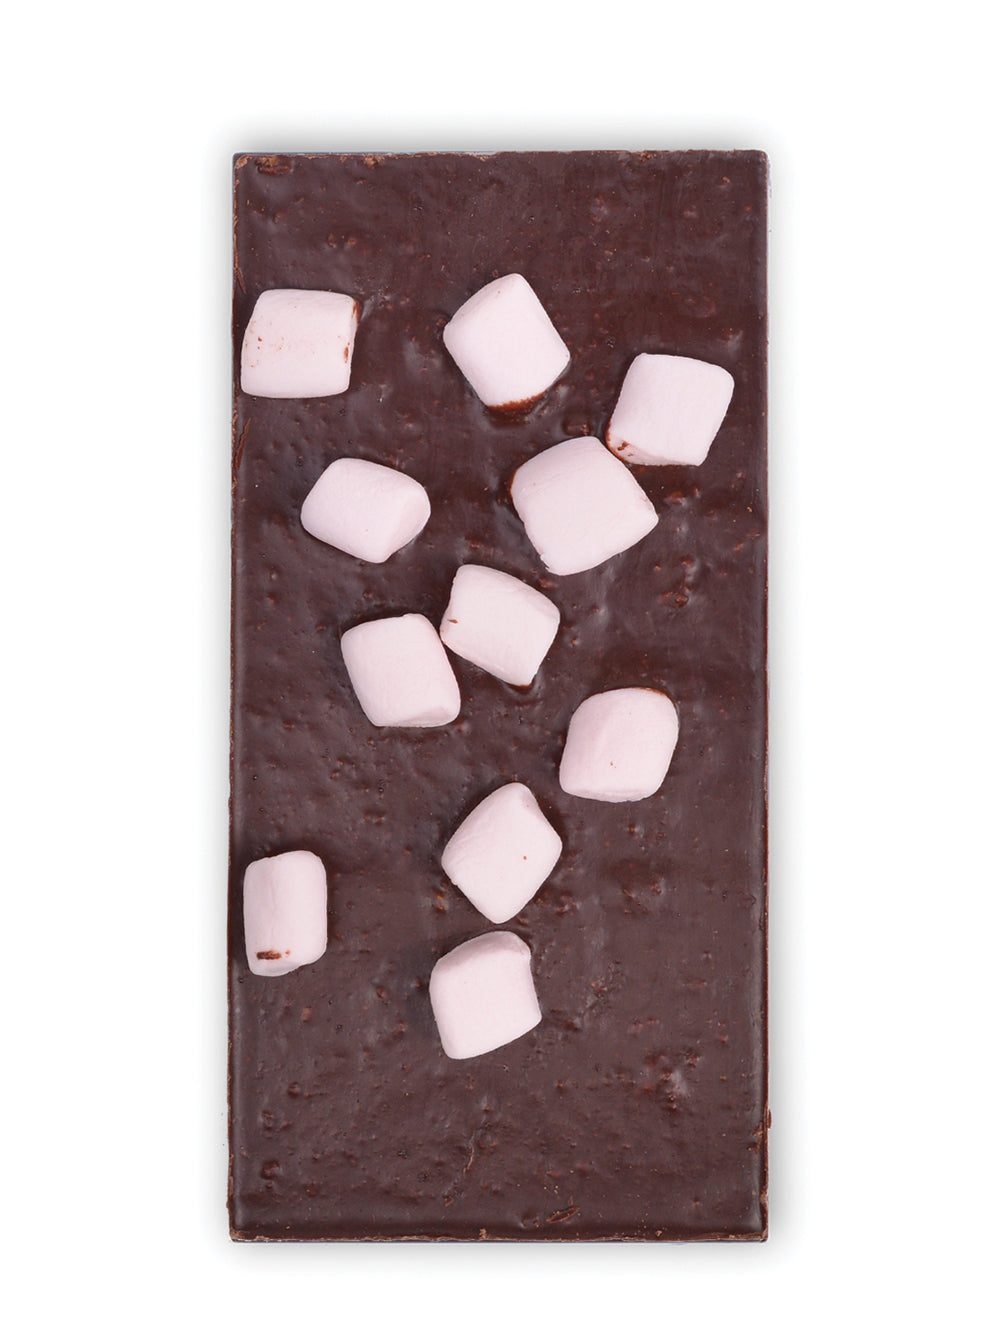 Snuggle Up S'mores Chocolate Bar Unpackaged